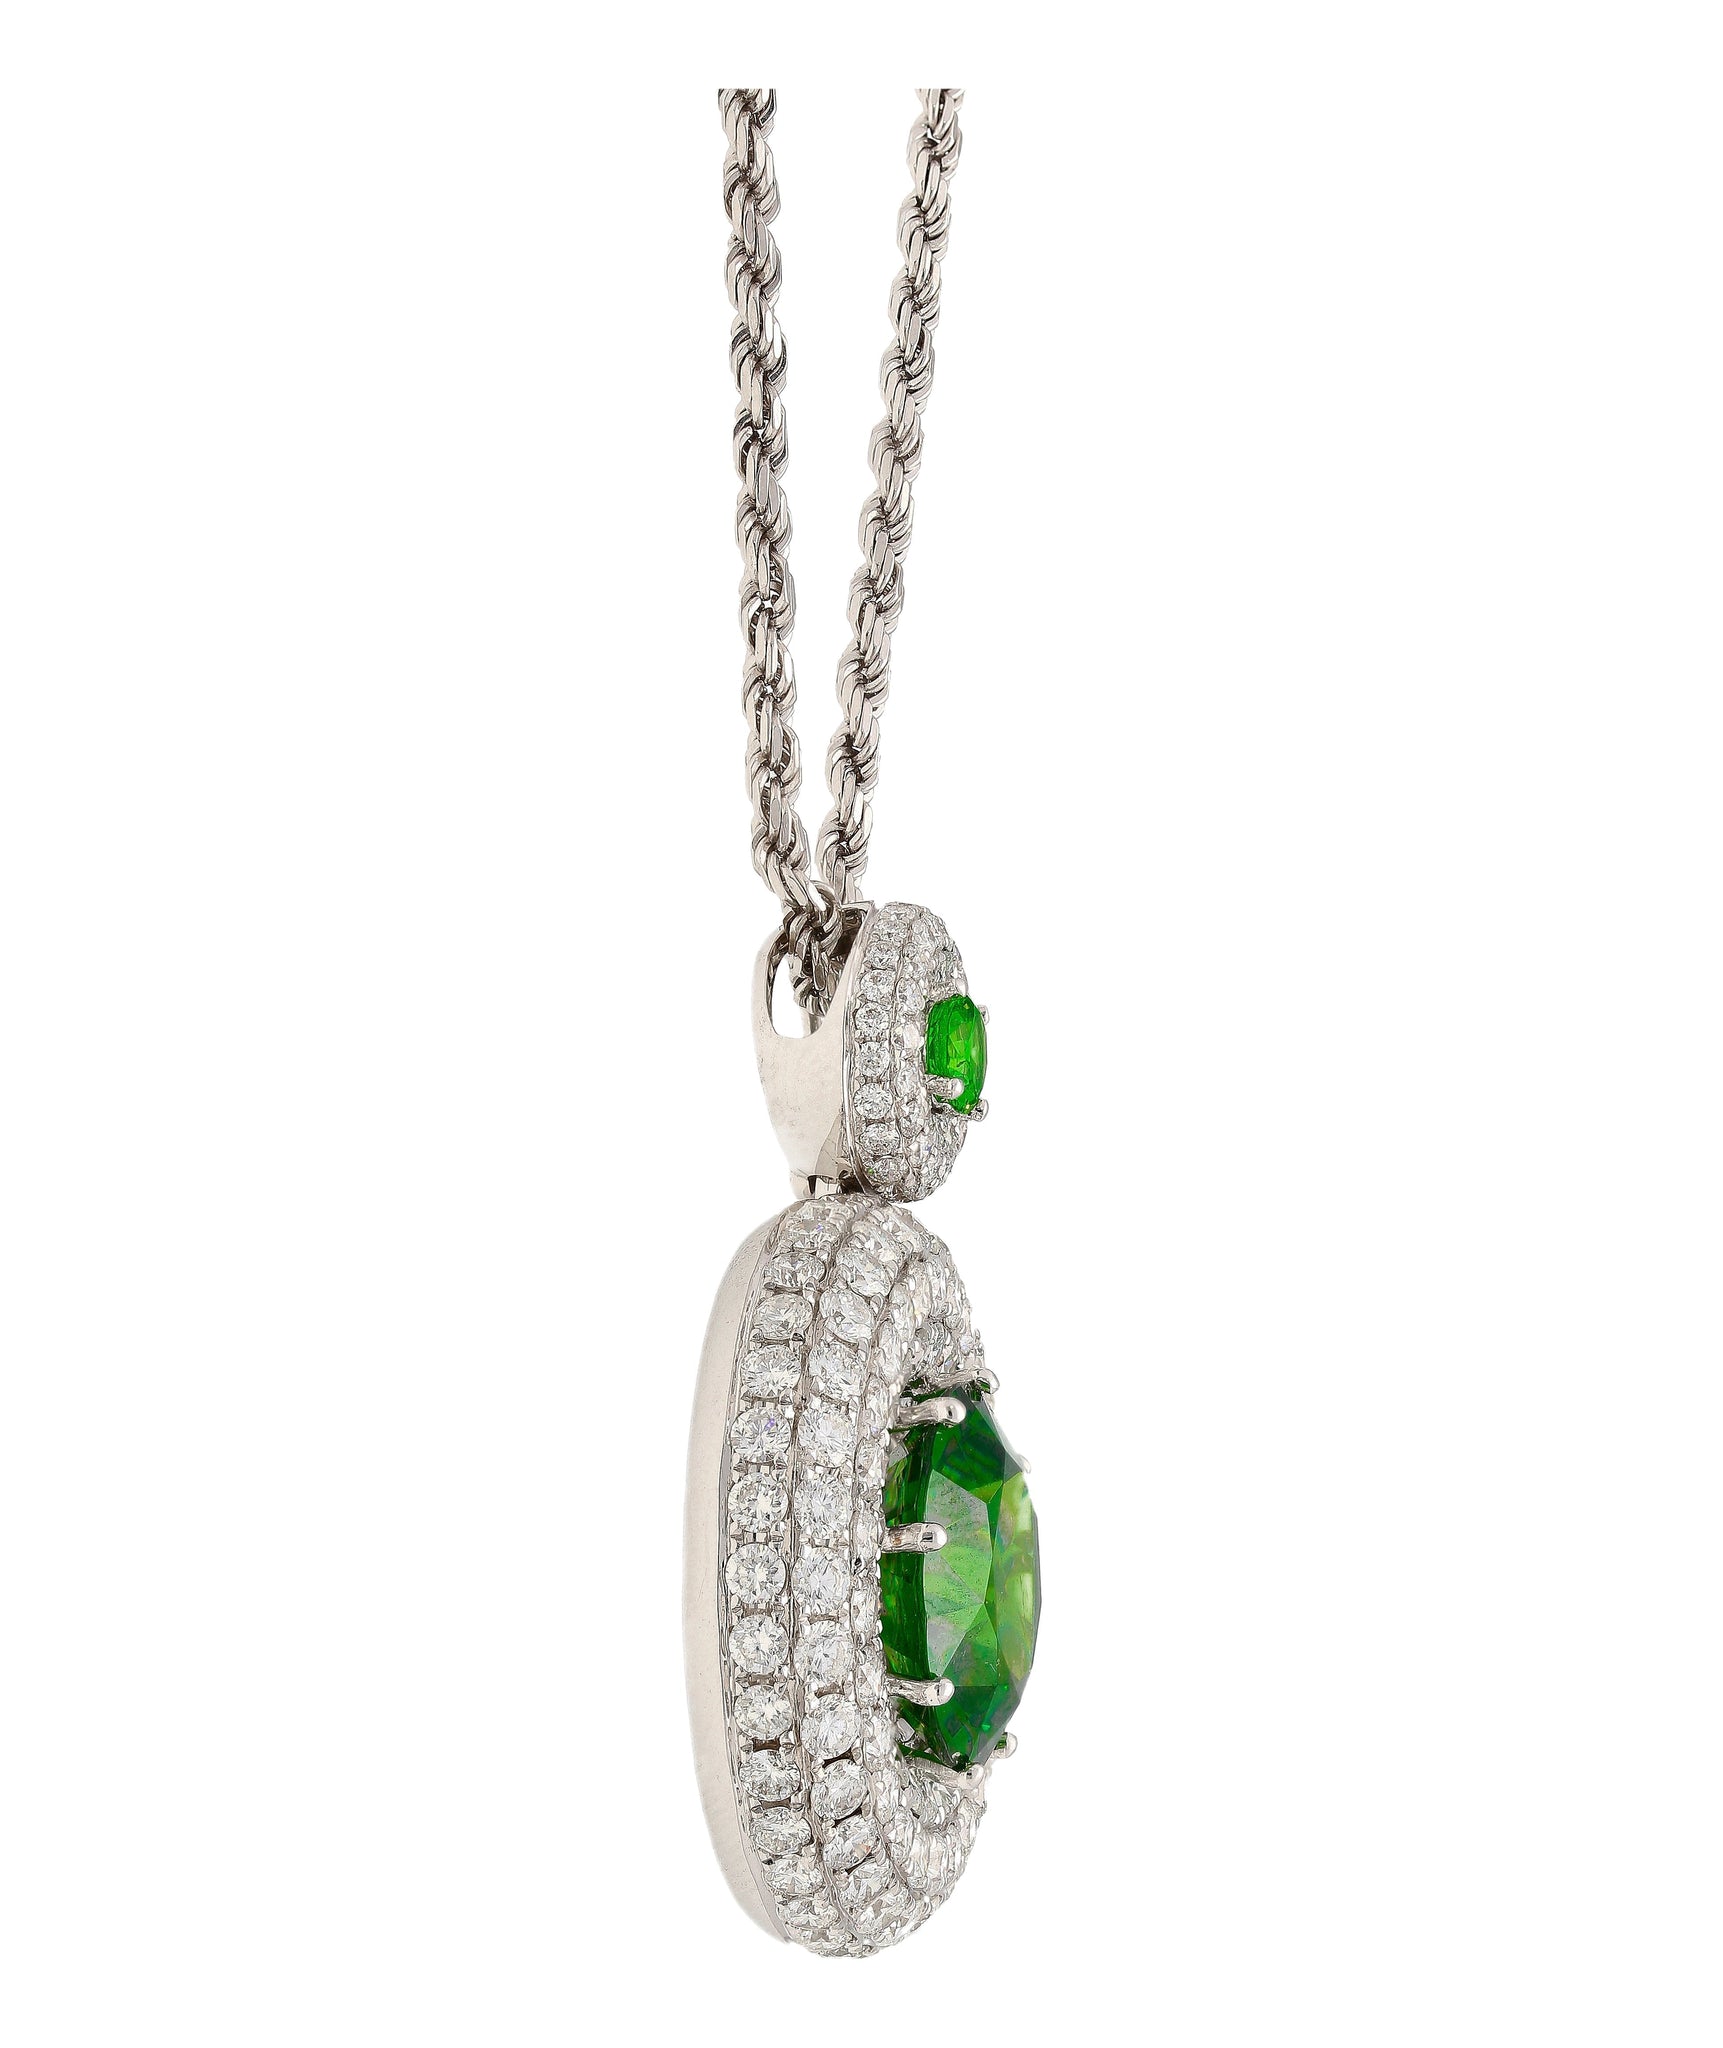 GIA Certified 8.58 Carat Demantoid Pendant Necklace with Diamond Halo in 18K White Gold